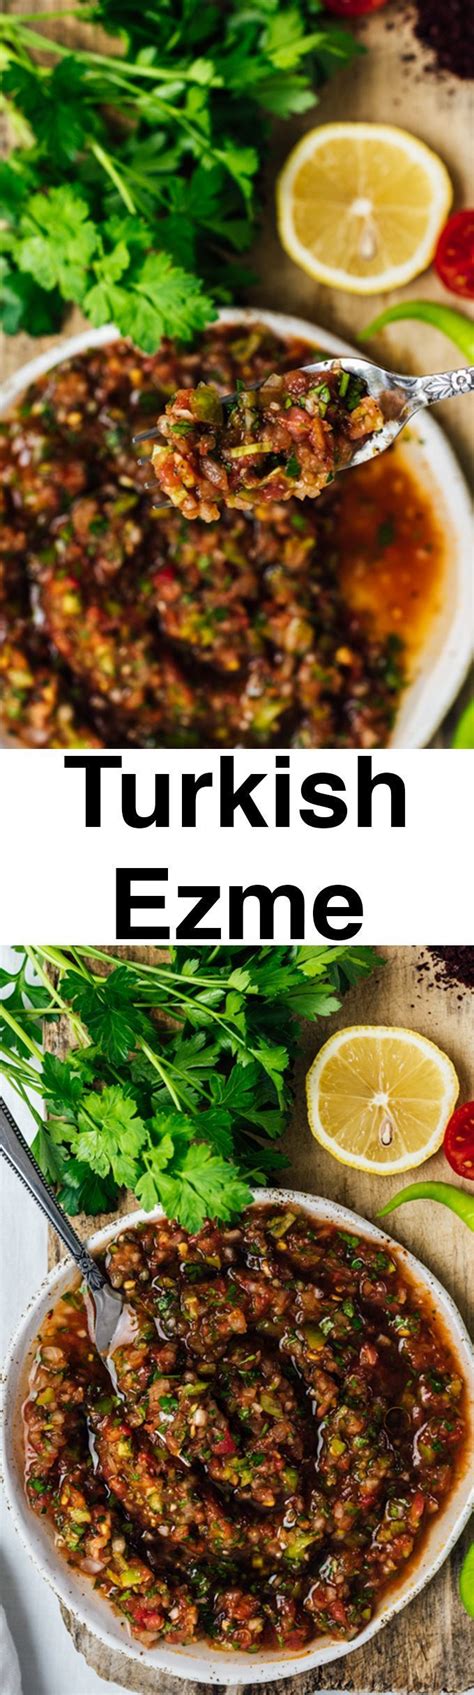 Served As A Sauce On Kebabs Or As A Salsa With Some Pita Turkish Ezme